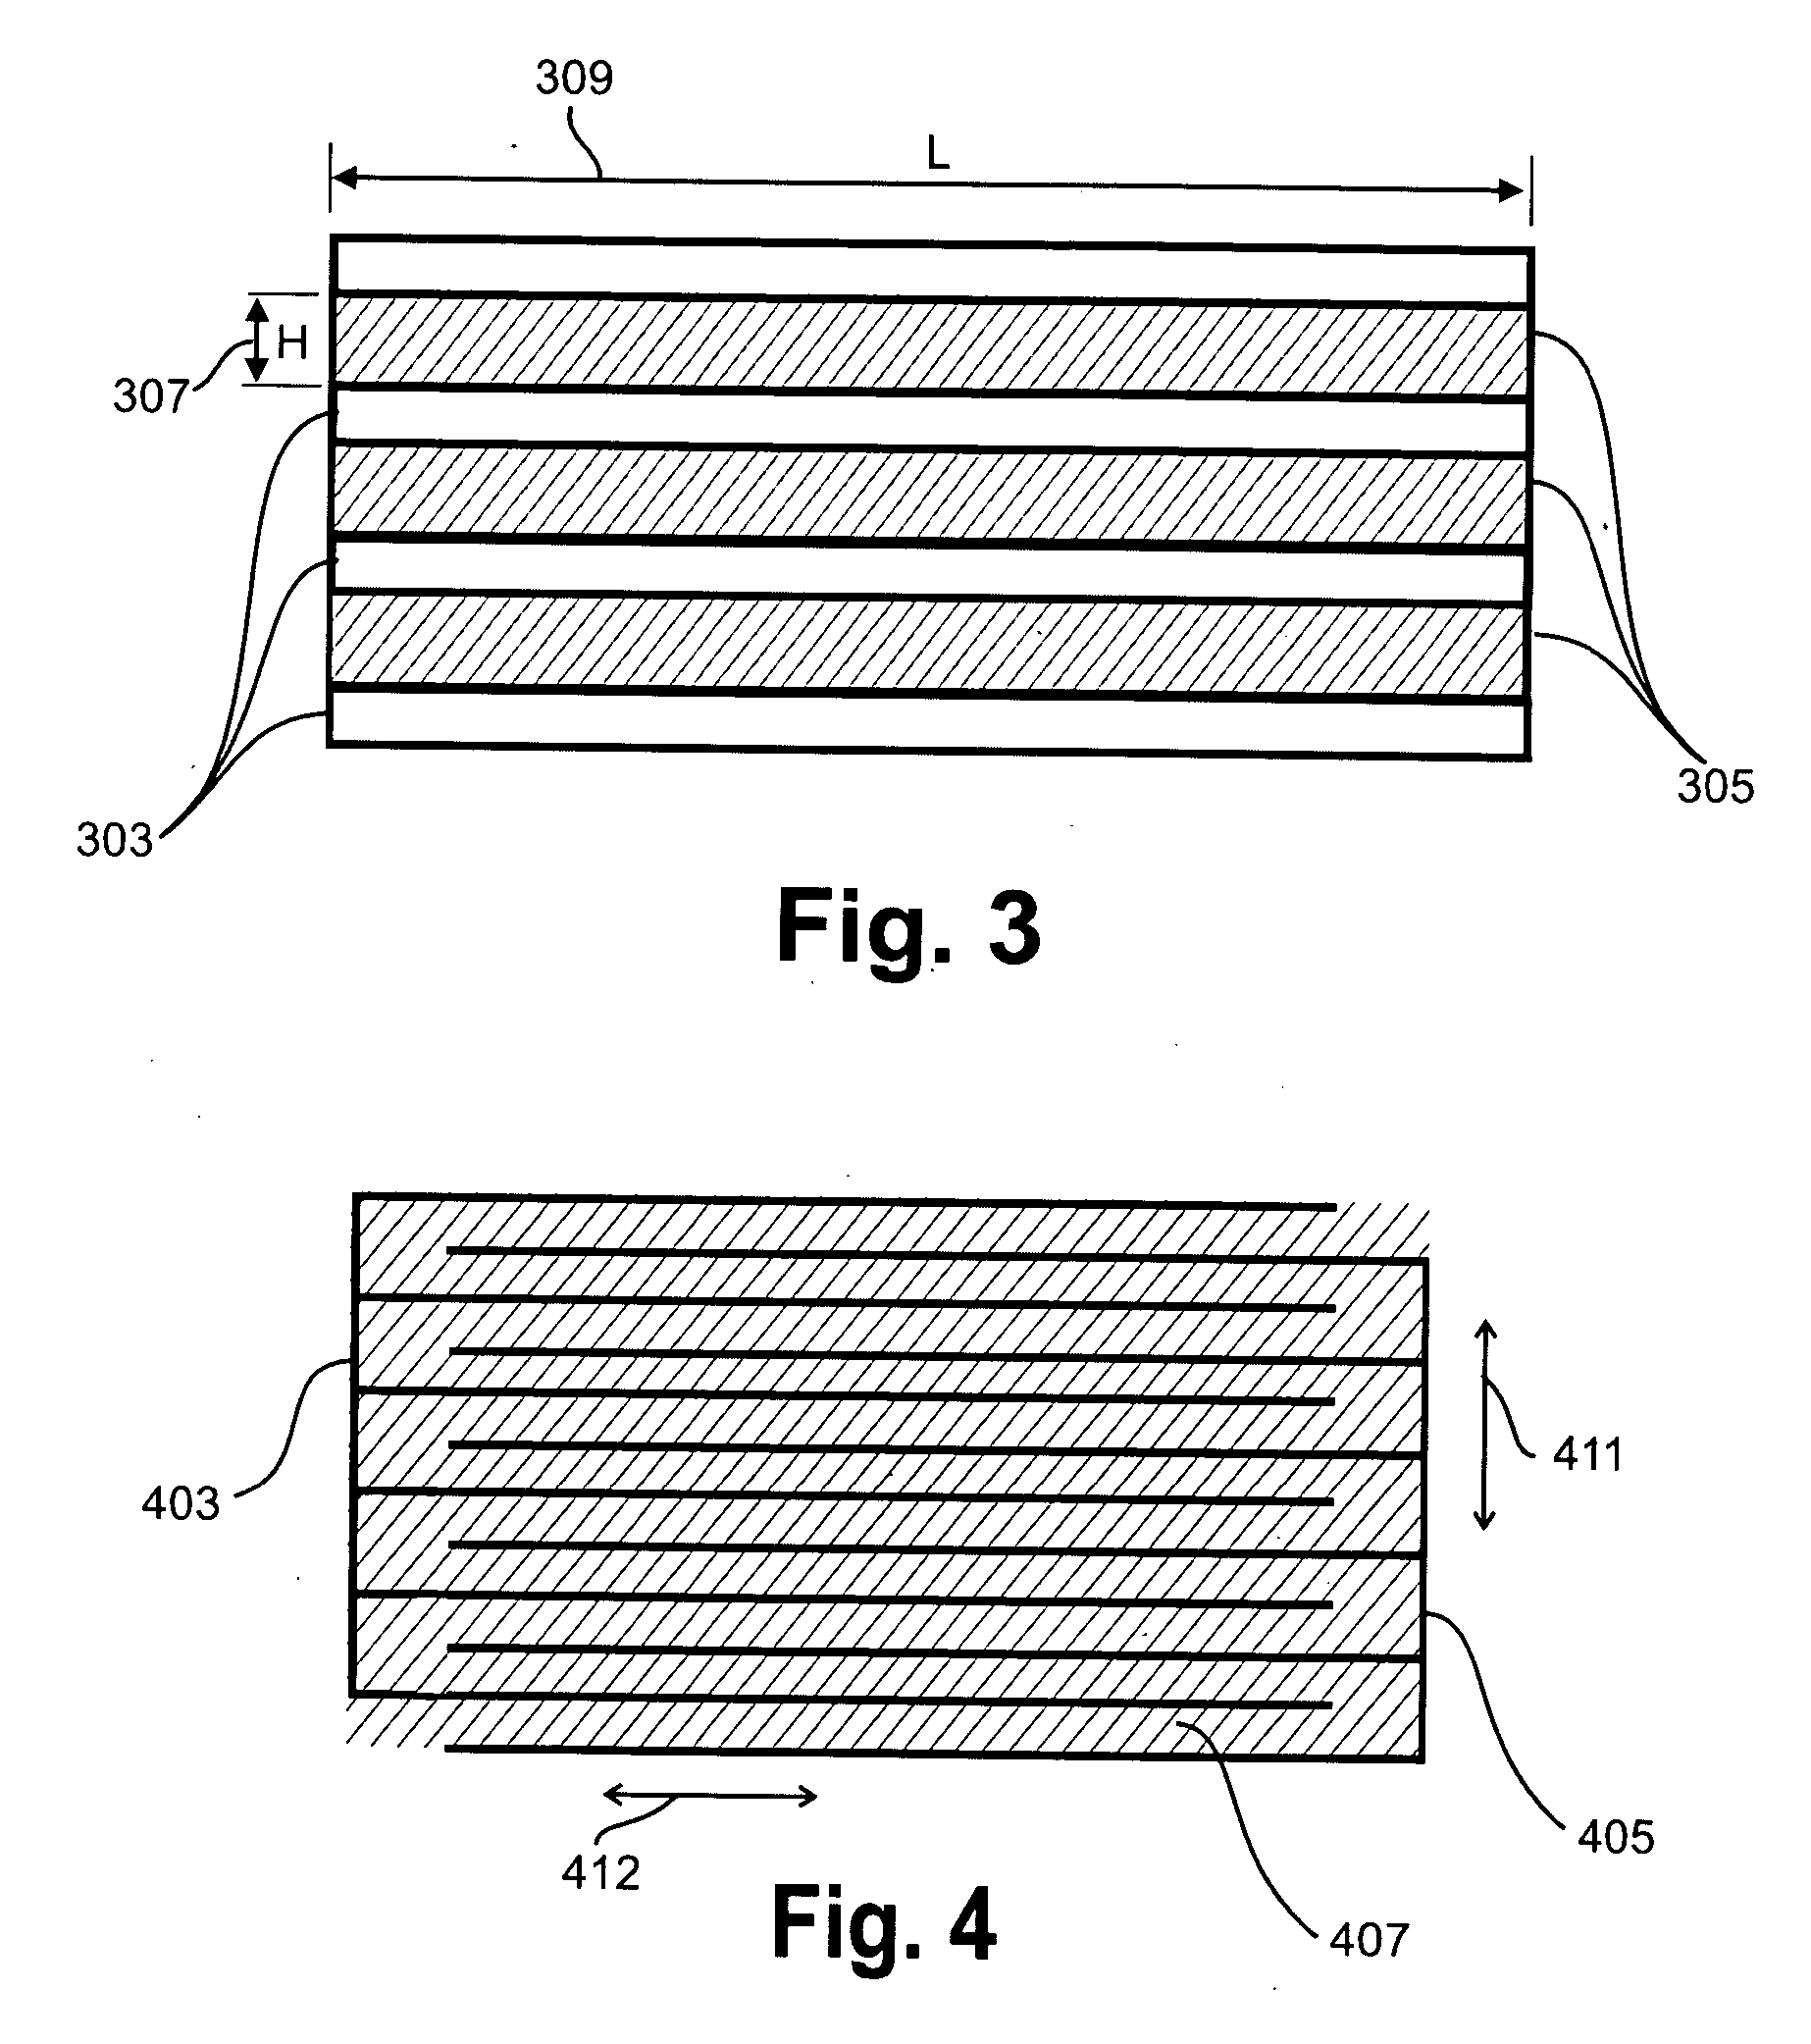 Active controlled energy absorber using responsive fluids